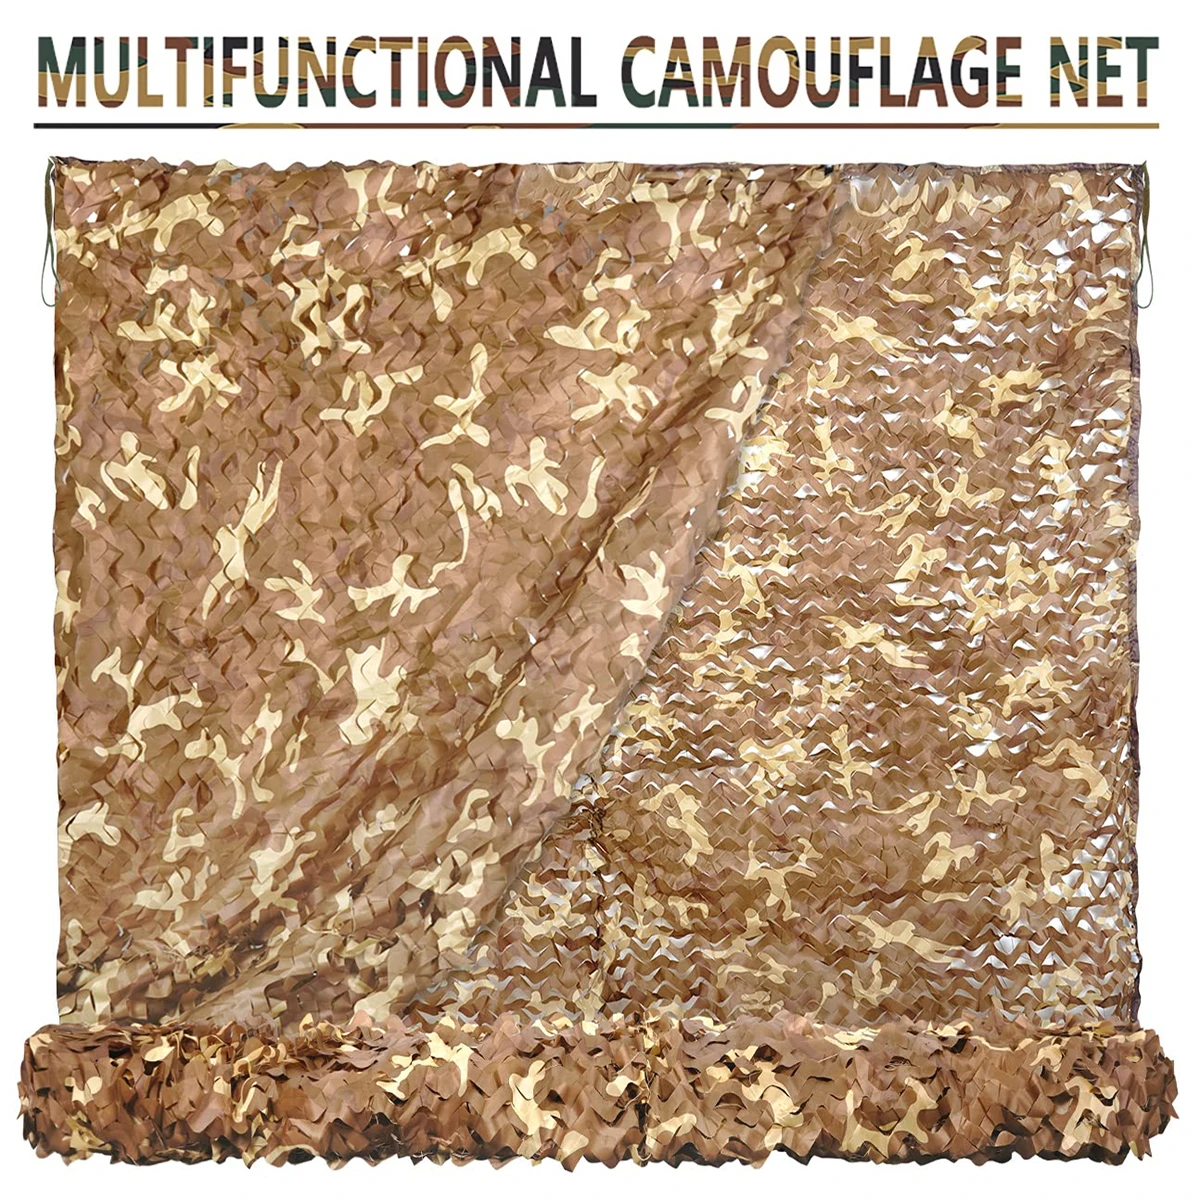 Military camouflage net, 210D Oxford cloth net, suitable for hunting ground shading and party decoration, size can be customized